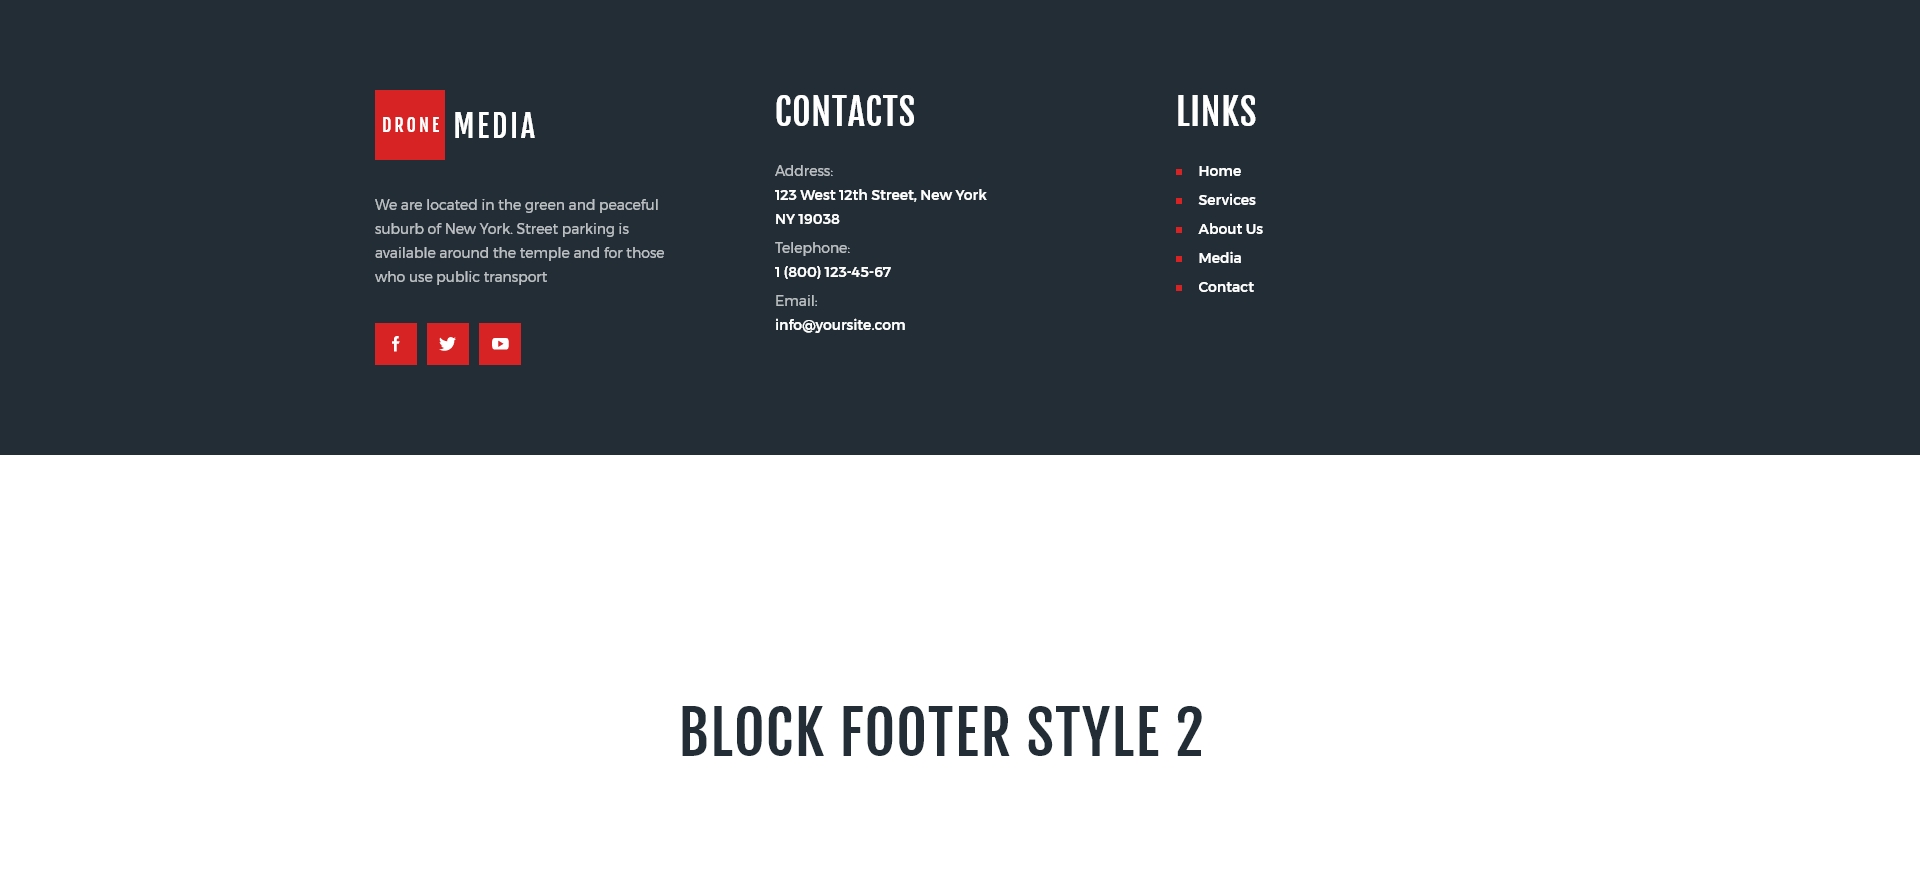 Block footer style 2